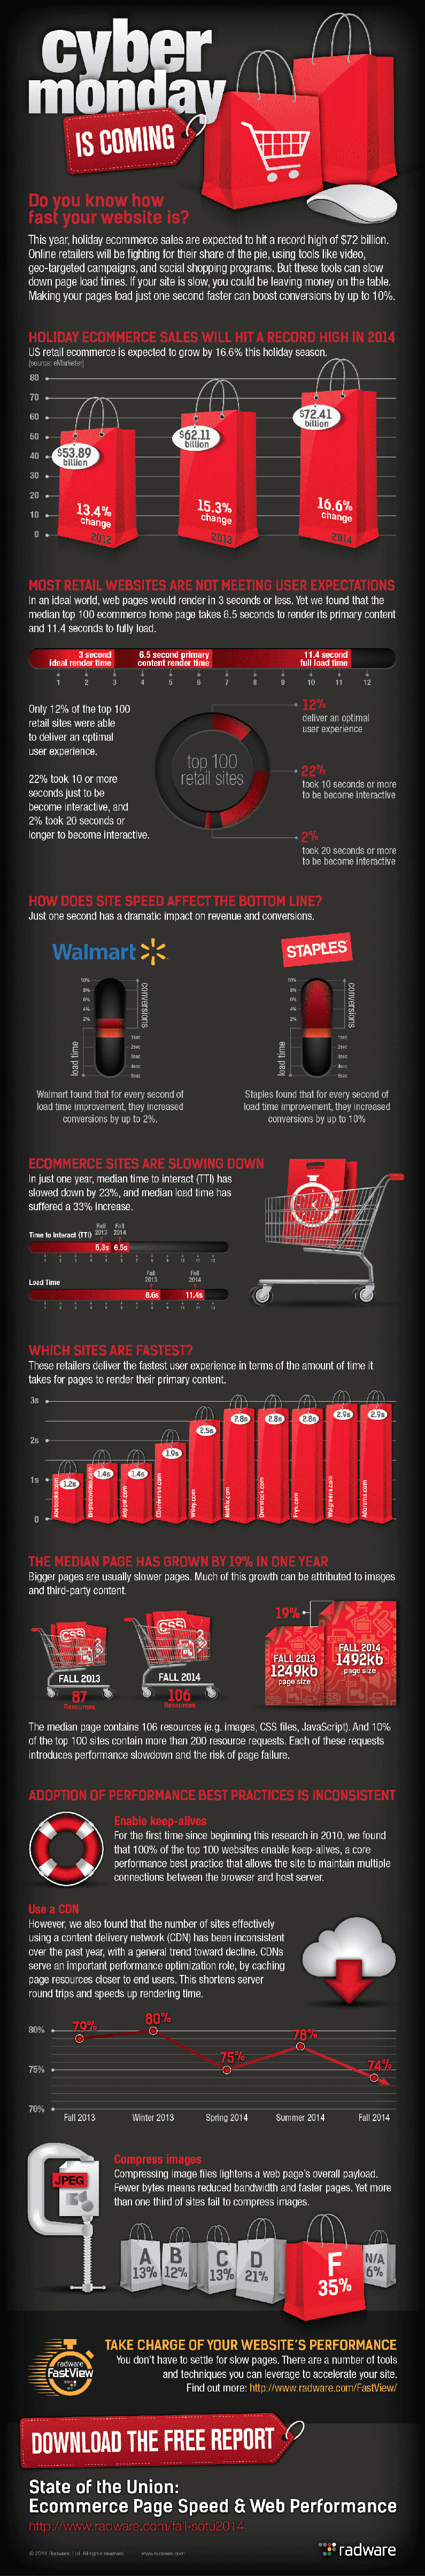 INFOGRAPHIC: Cyber Monday 2014 and Web Performance